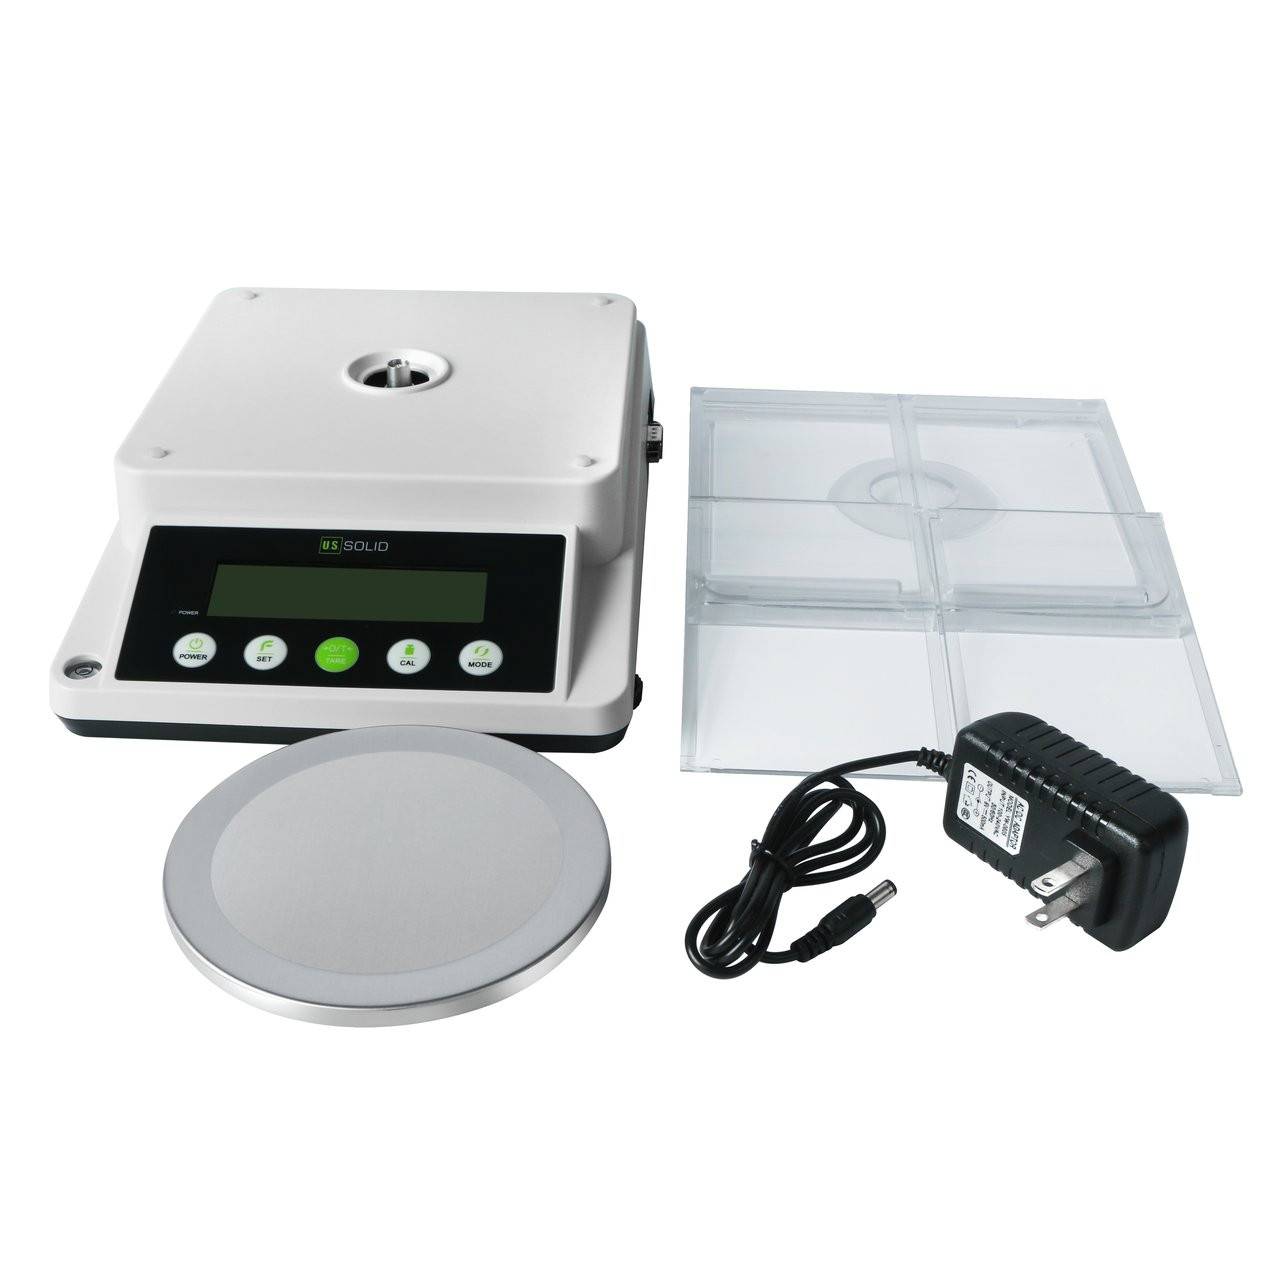 U.S. Solid 3kg x 0.01g Precision Balance – 2 LED Sceens 10mg Digital  Analytical Lab Electronic Scale, 3100 g x 0.01g - U.S. Solid